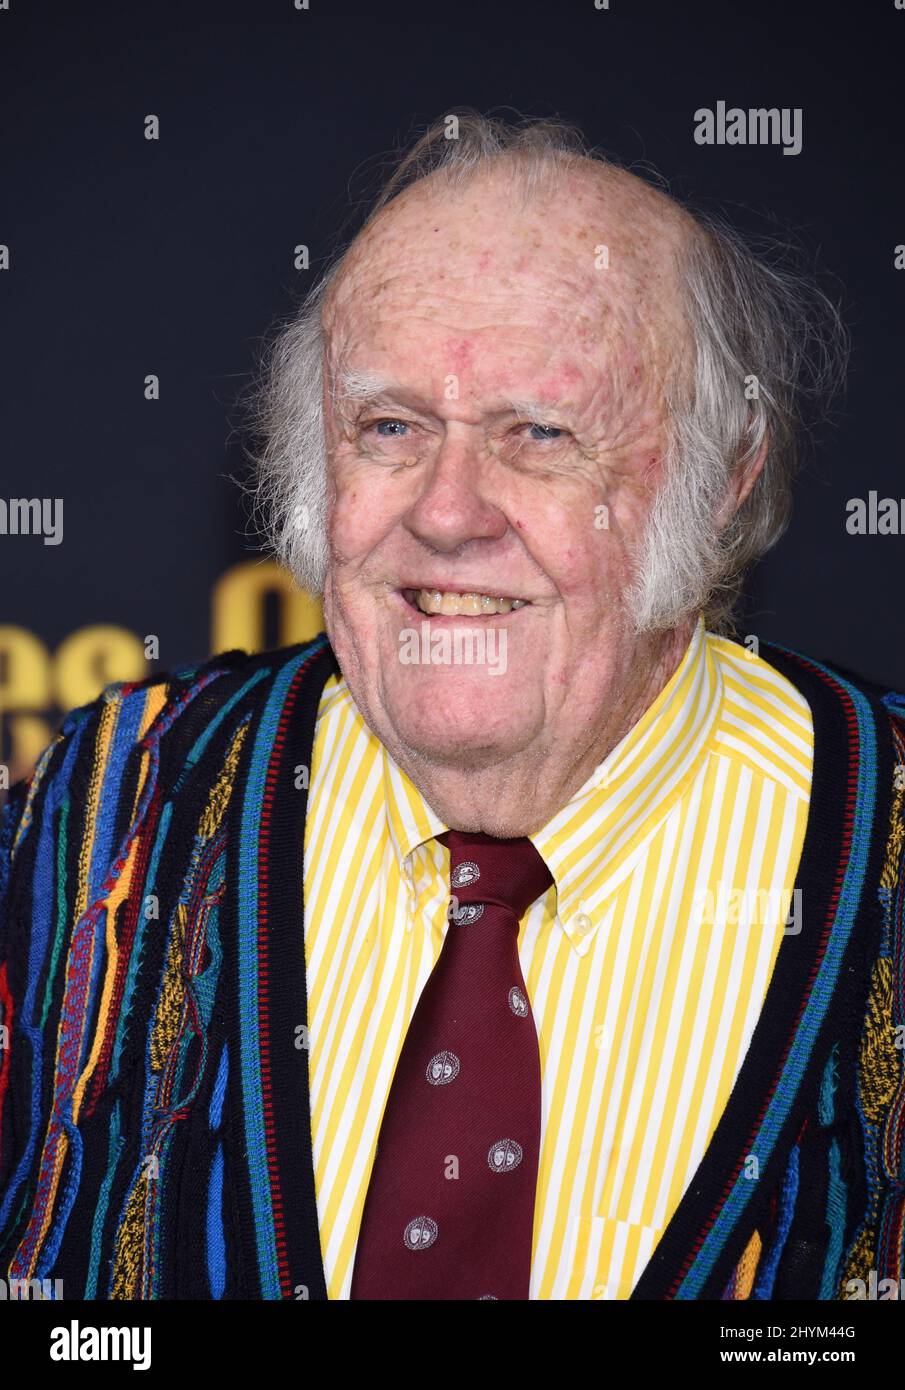 M. Emmet Walsh at the "Knives Out" Los Angeles Premiere held at the Regency Village Theatre on November 14, 2019 in Westwood, Los Angeles. Stock Photo